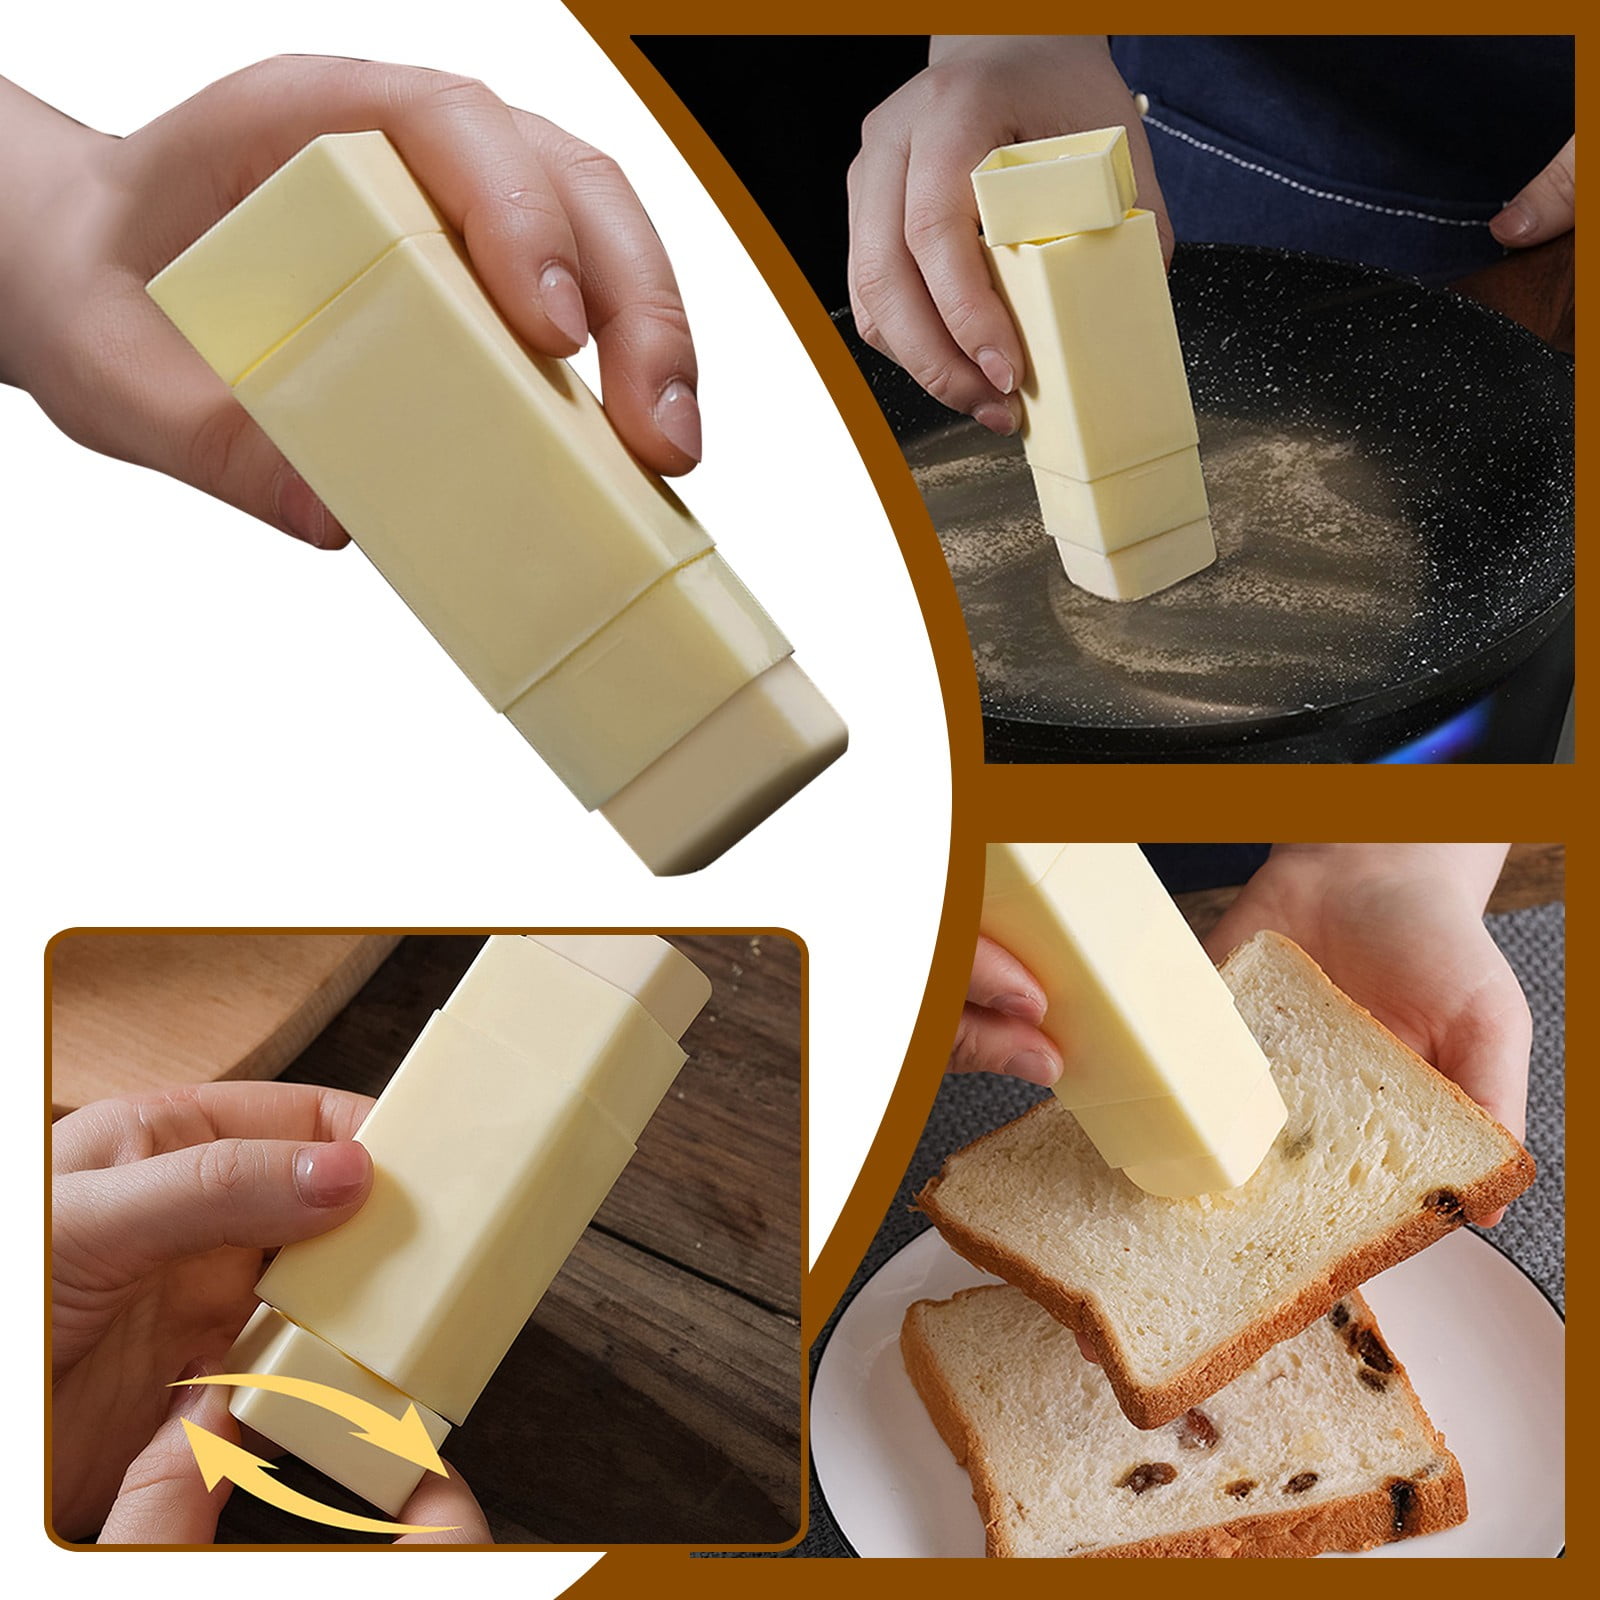 Rotary Type Butter Spreader ,Corn COB Butter Spreader, Butter Dispenser Butter Stick Holder, Spreads Butter Evenly on Pancakes , Waffles, Toast